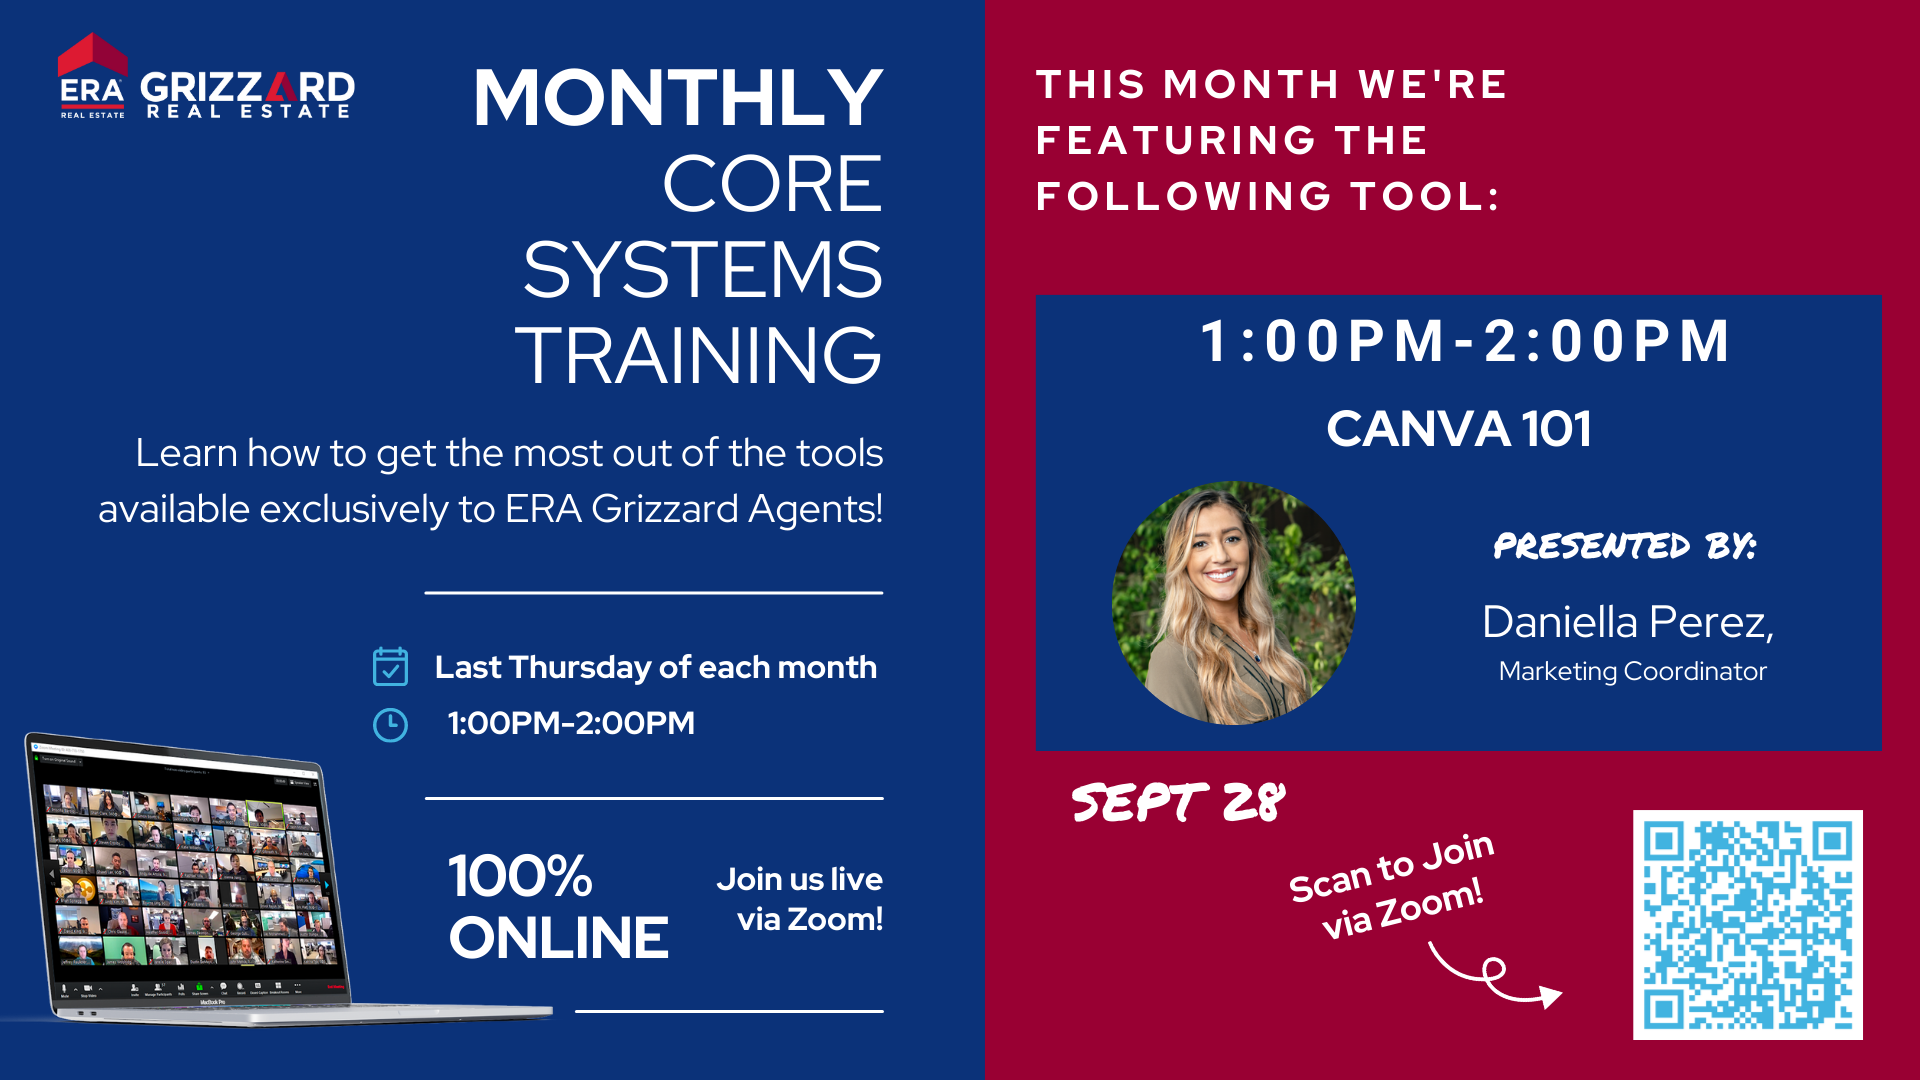 Monthly Core Systems Training